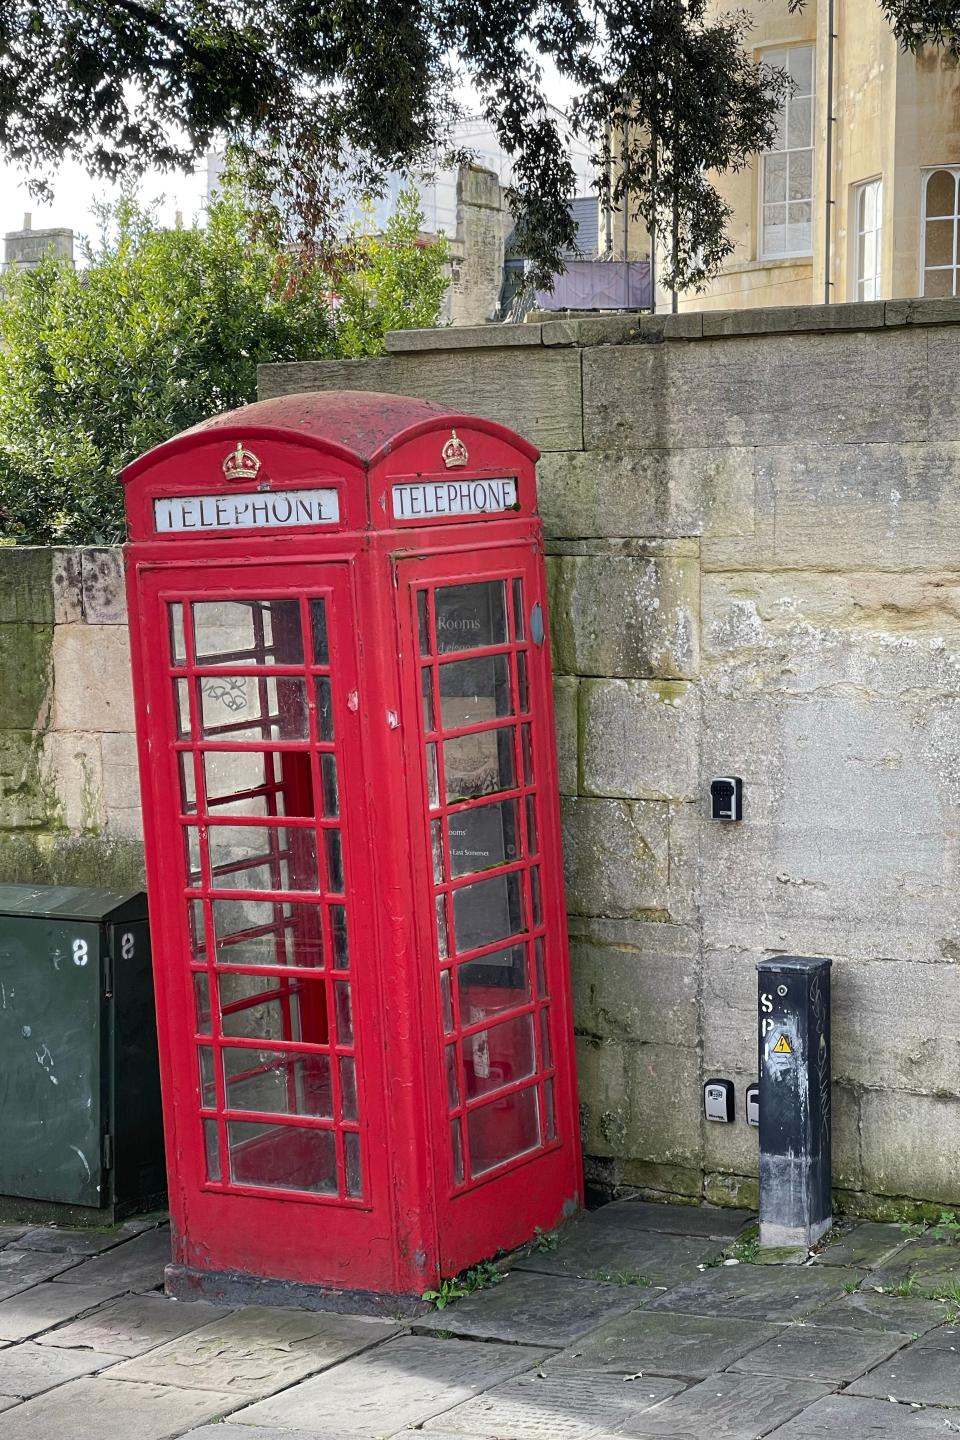 Two classic red British telephone booths stand side by side against a stone wall in an outdoor setting